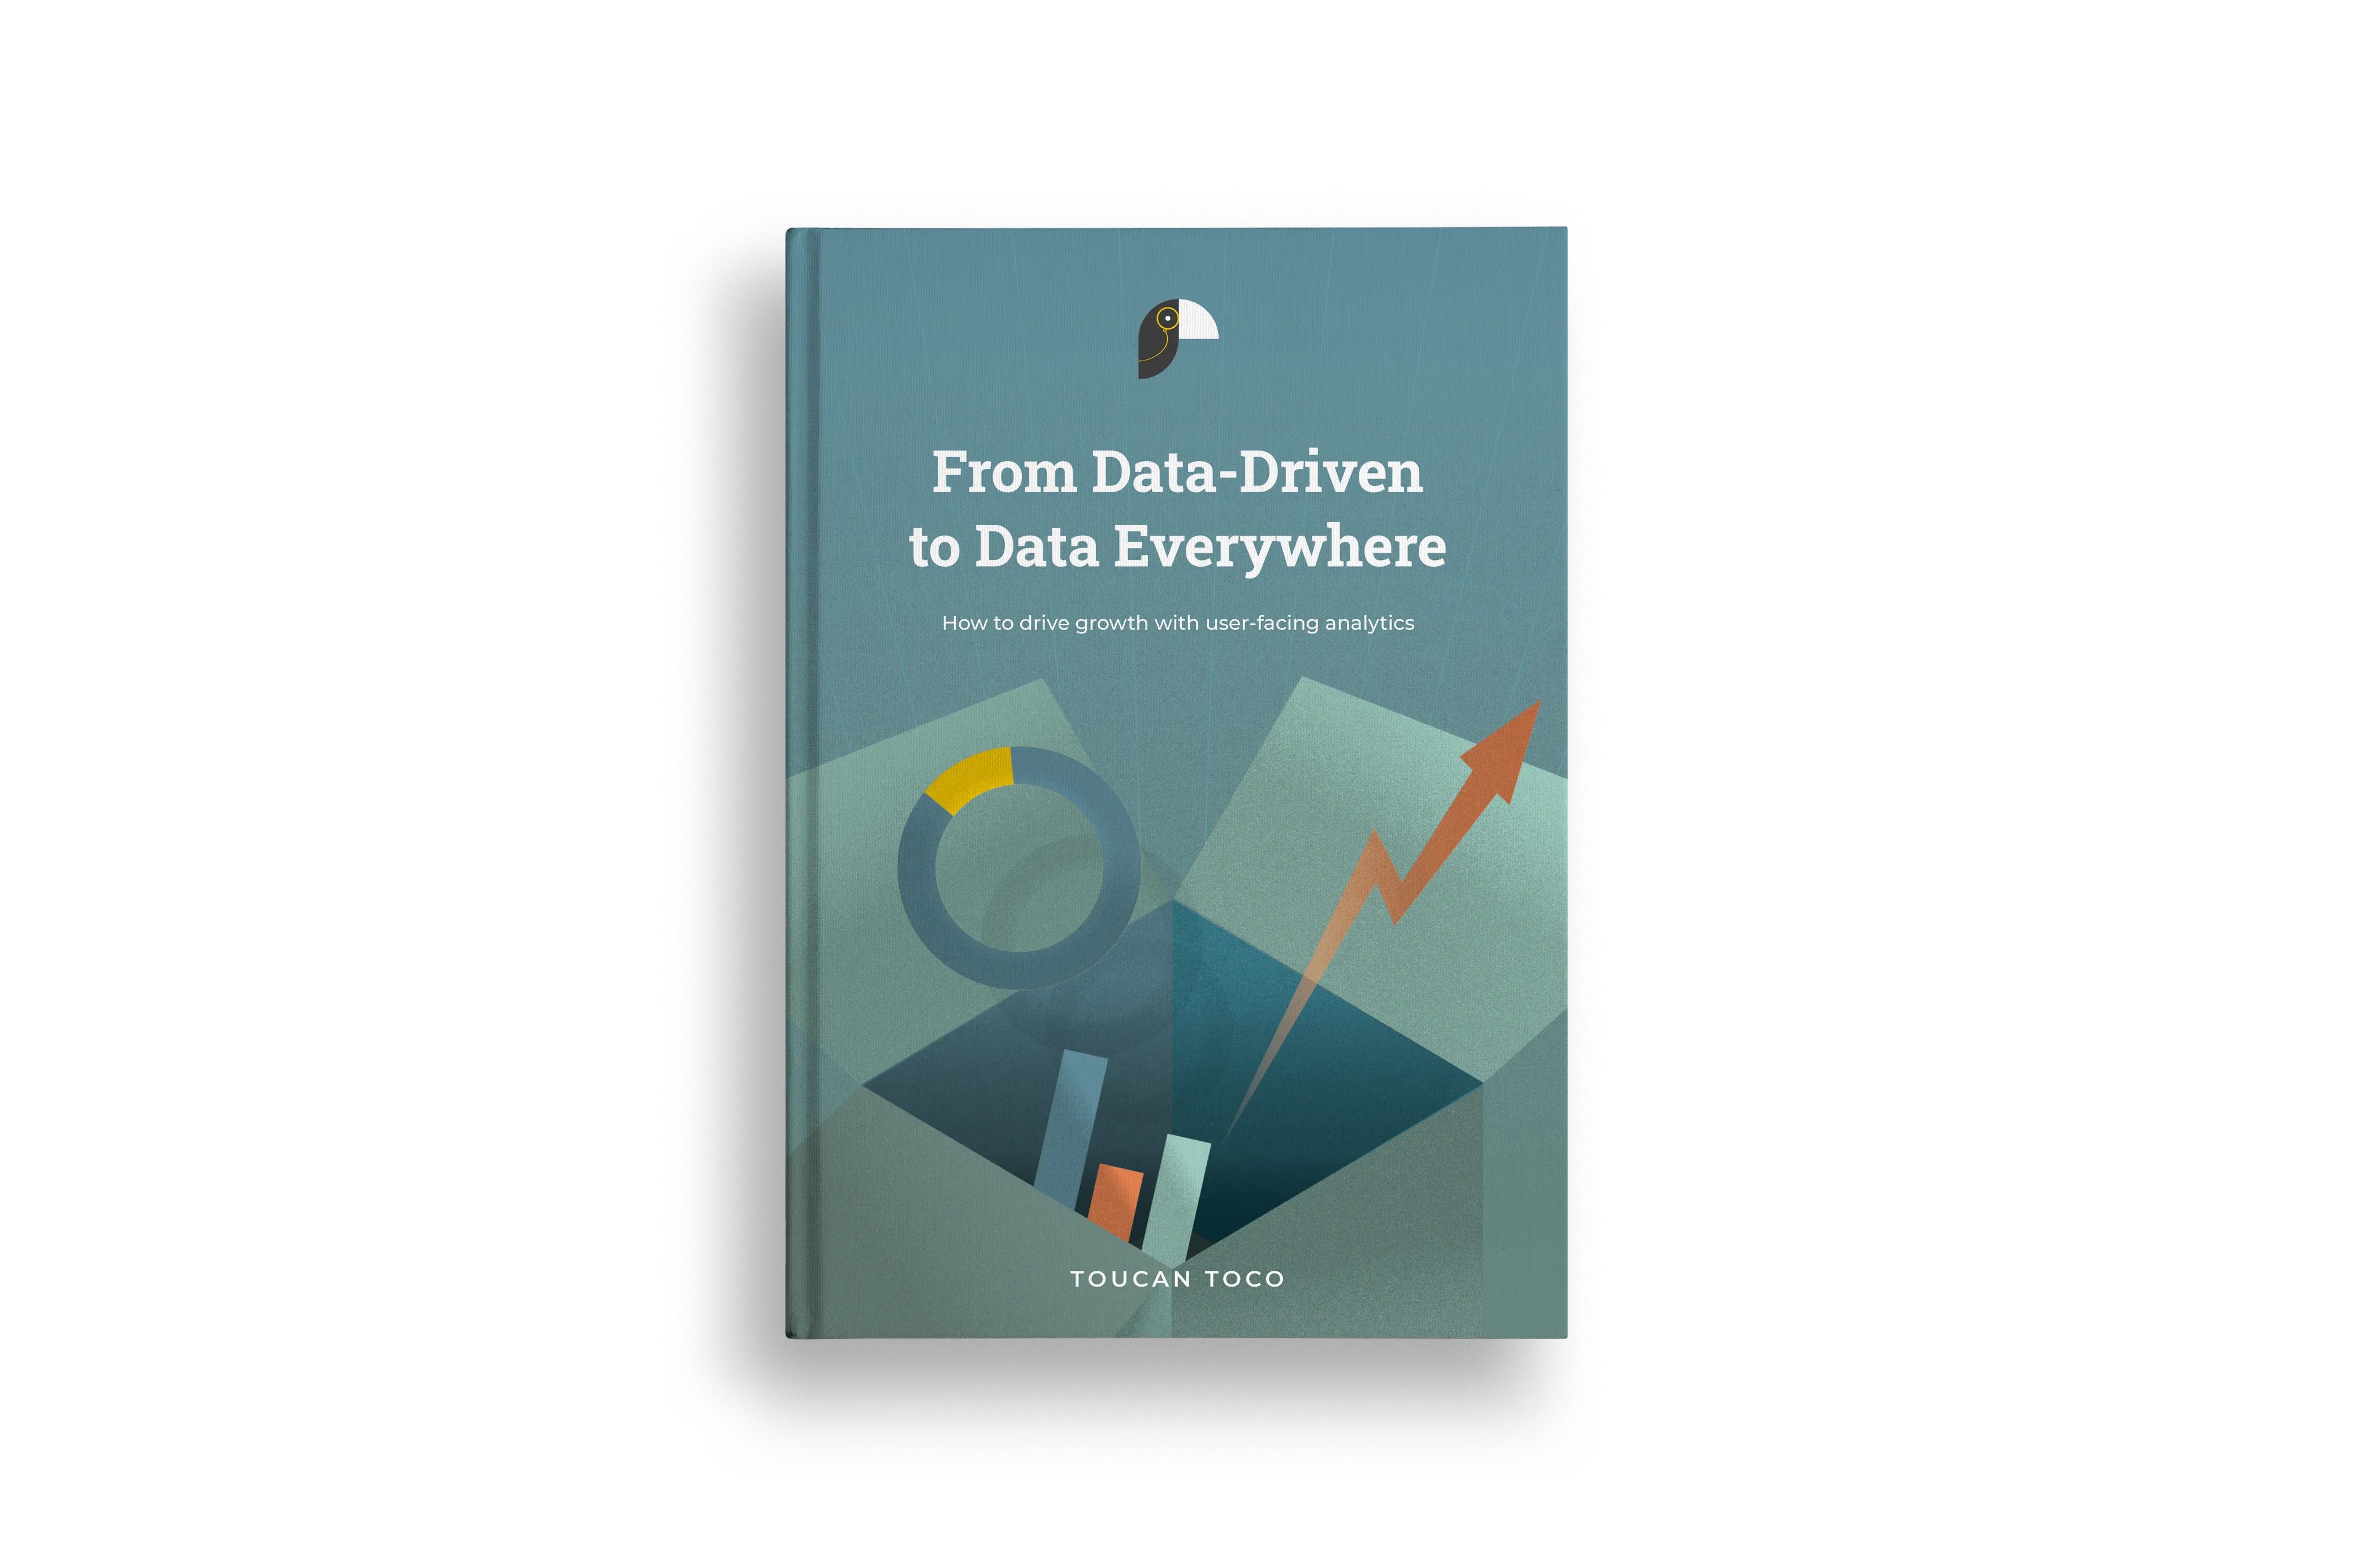 From-Data-Driven-to-Data-Everywhere-eBook-Mockup-Transparent